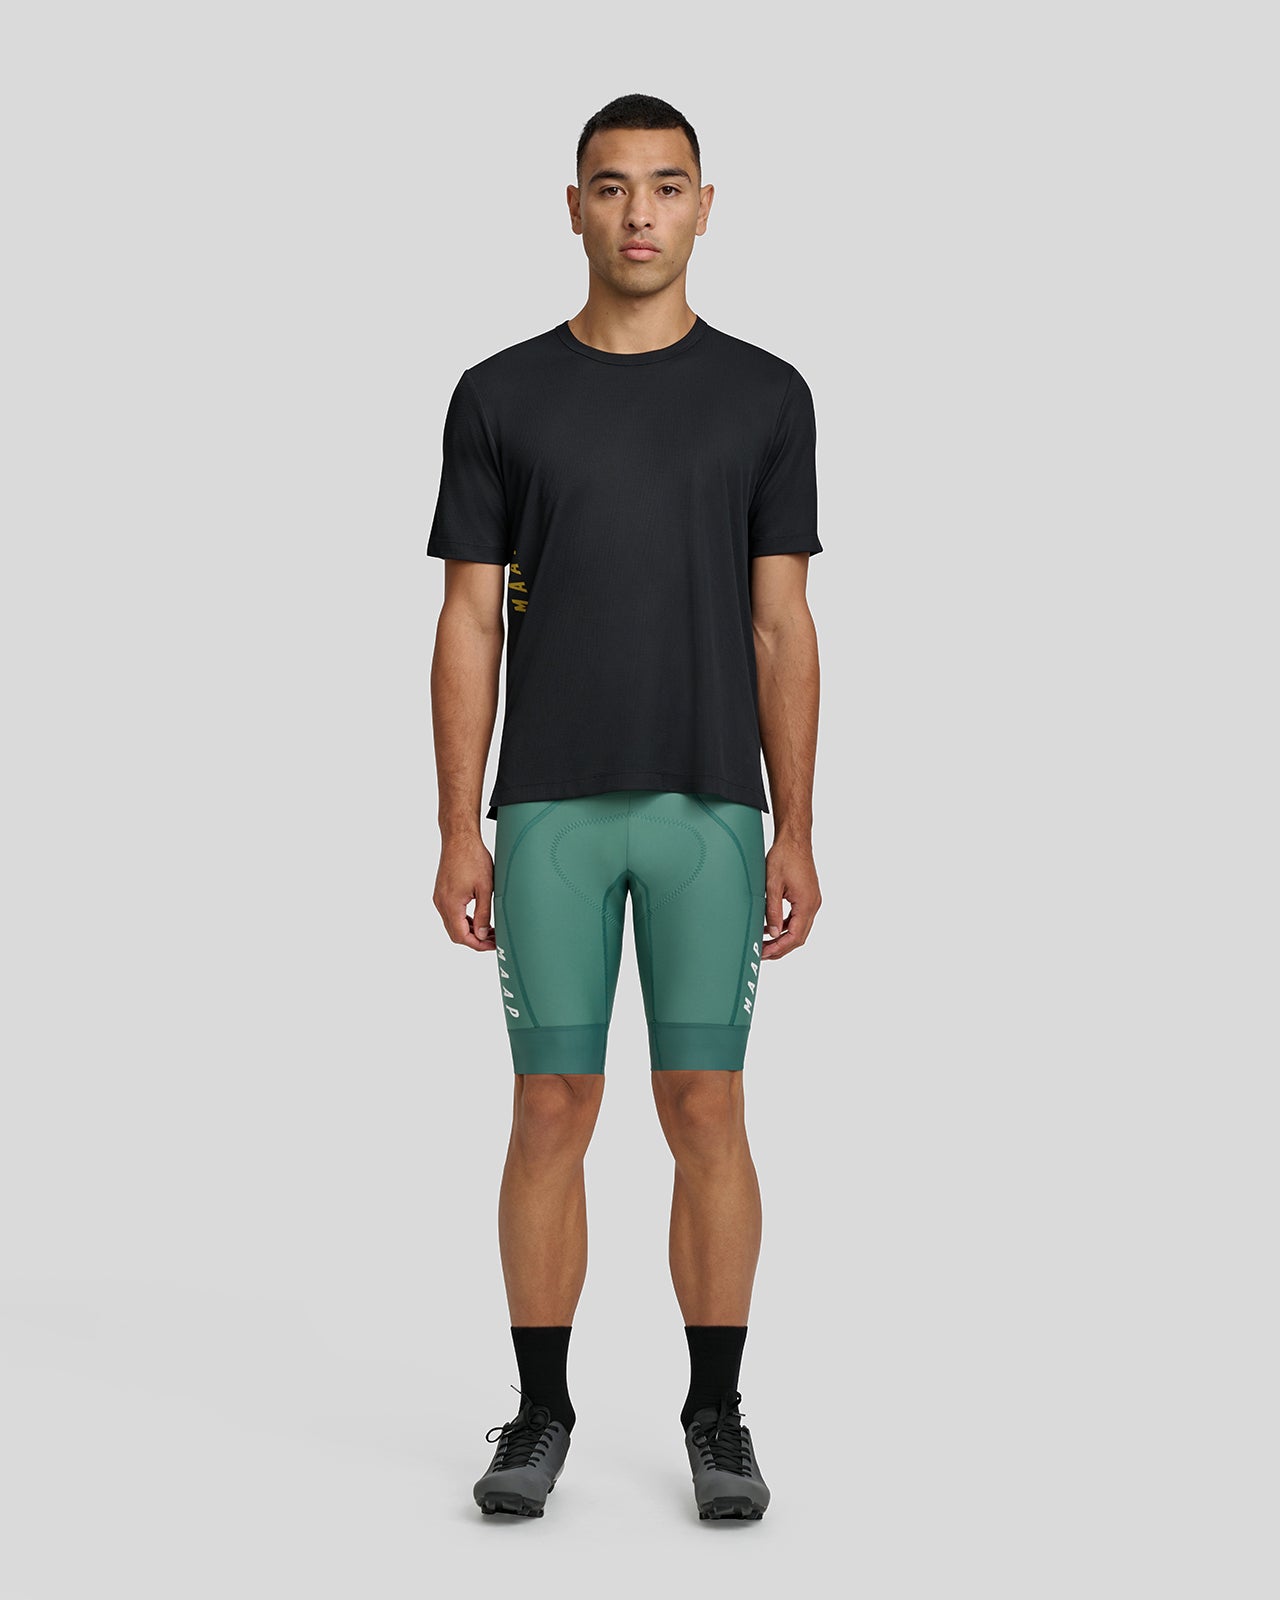 Sequence Ride Short - MAAP Cycling Apparel